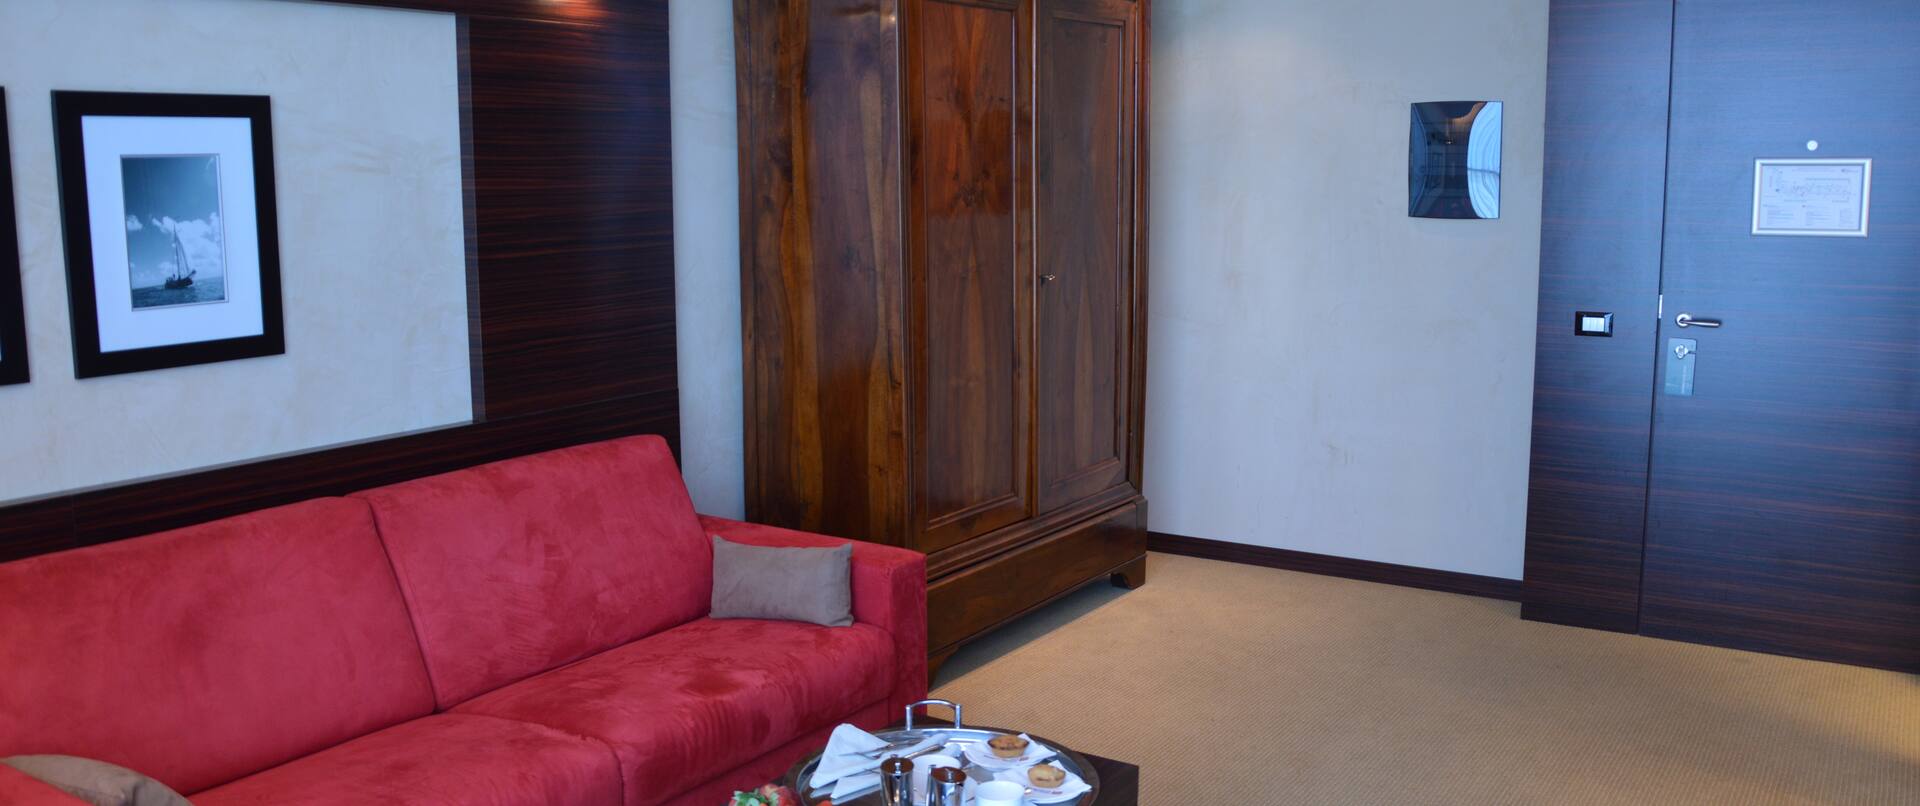 Living Area With Wall Art, Red Sofa, Table with Room Service Tray, Wood Cabinet in Corner by Suite Entry Door.